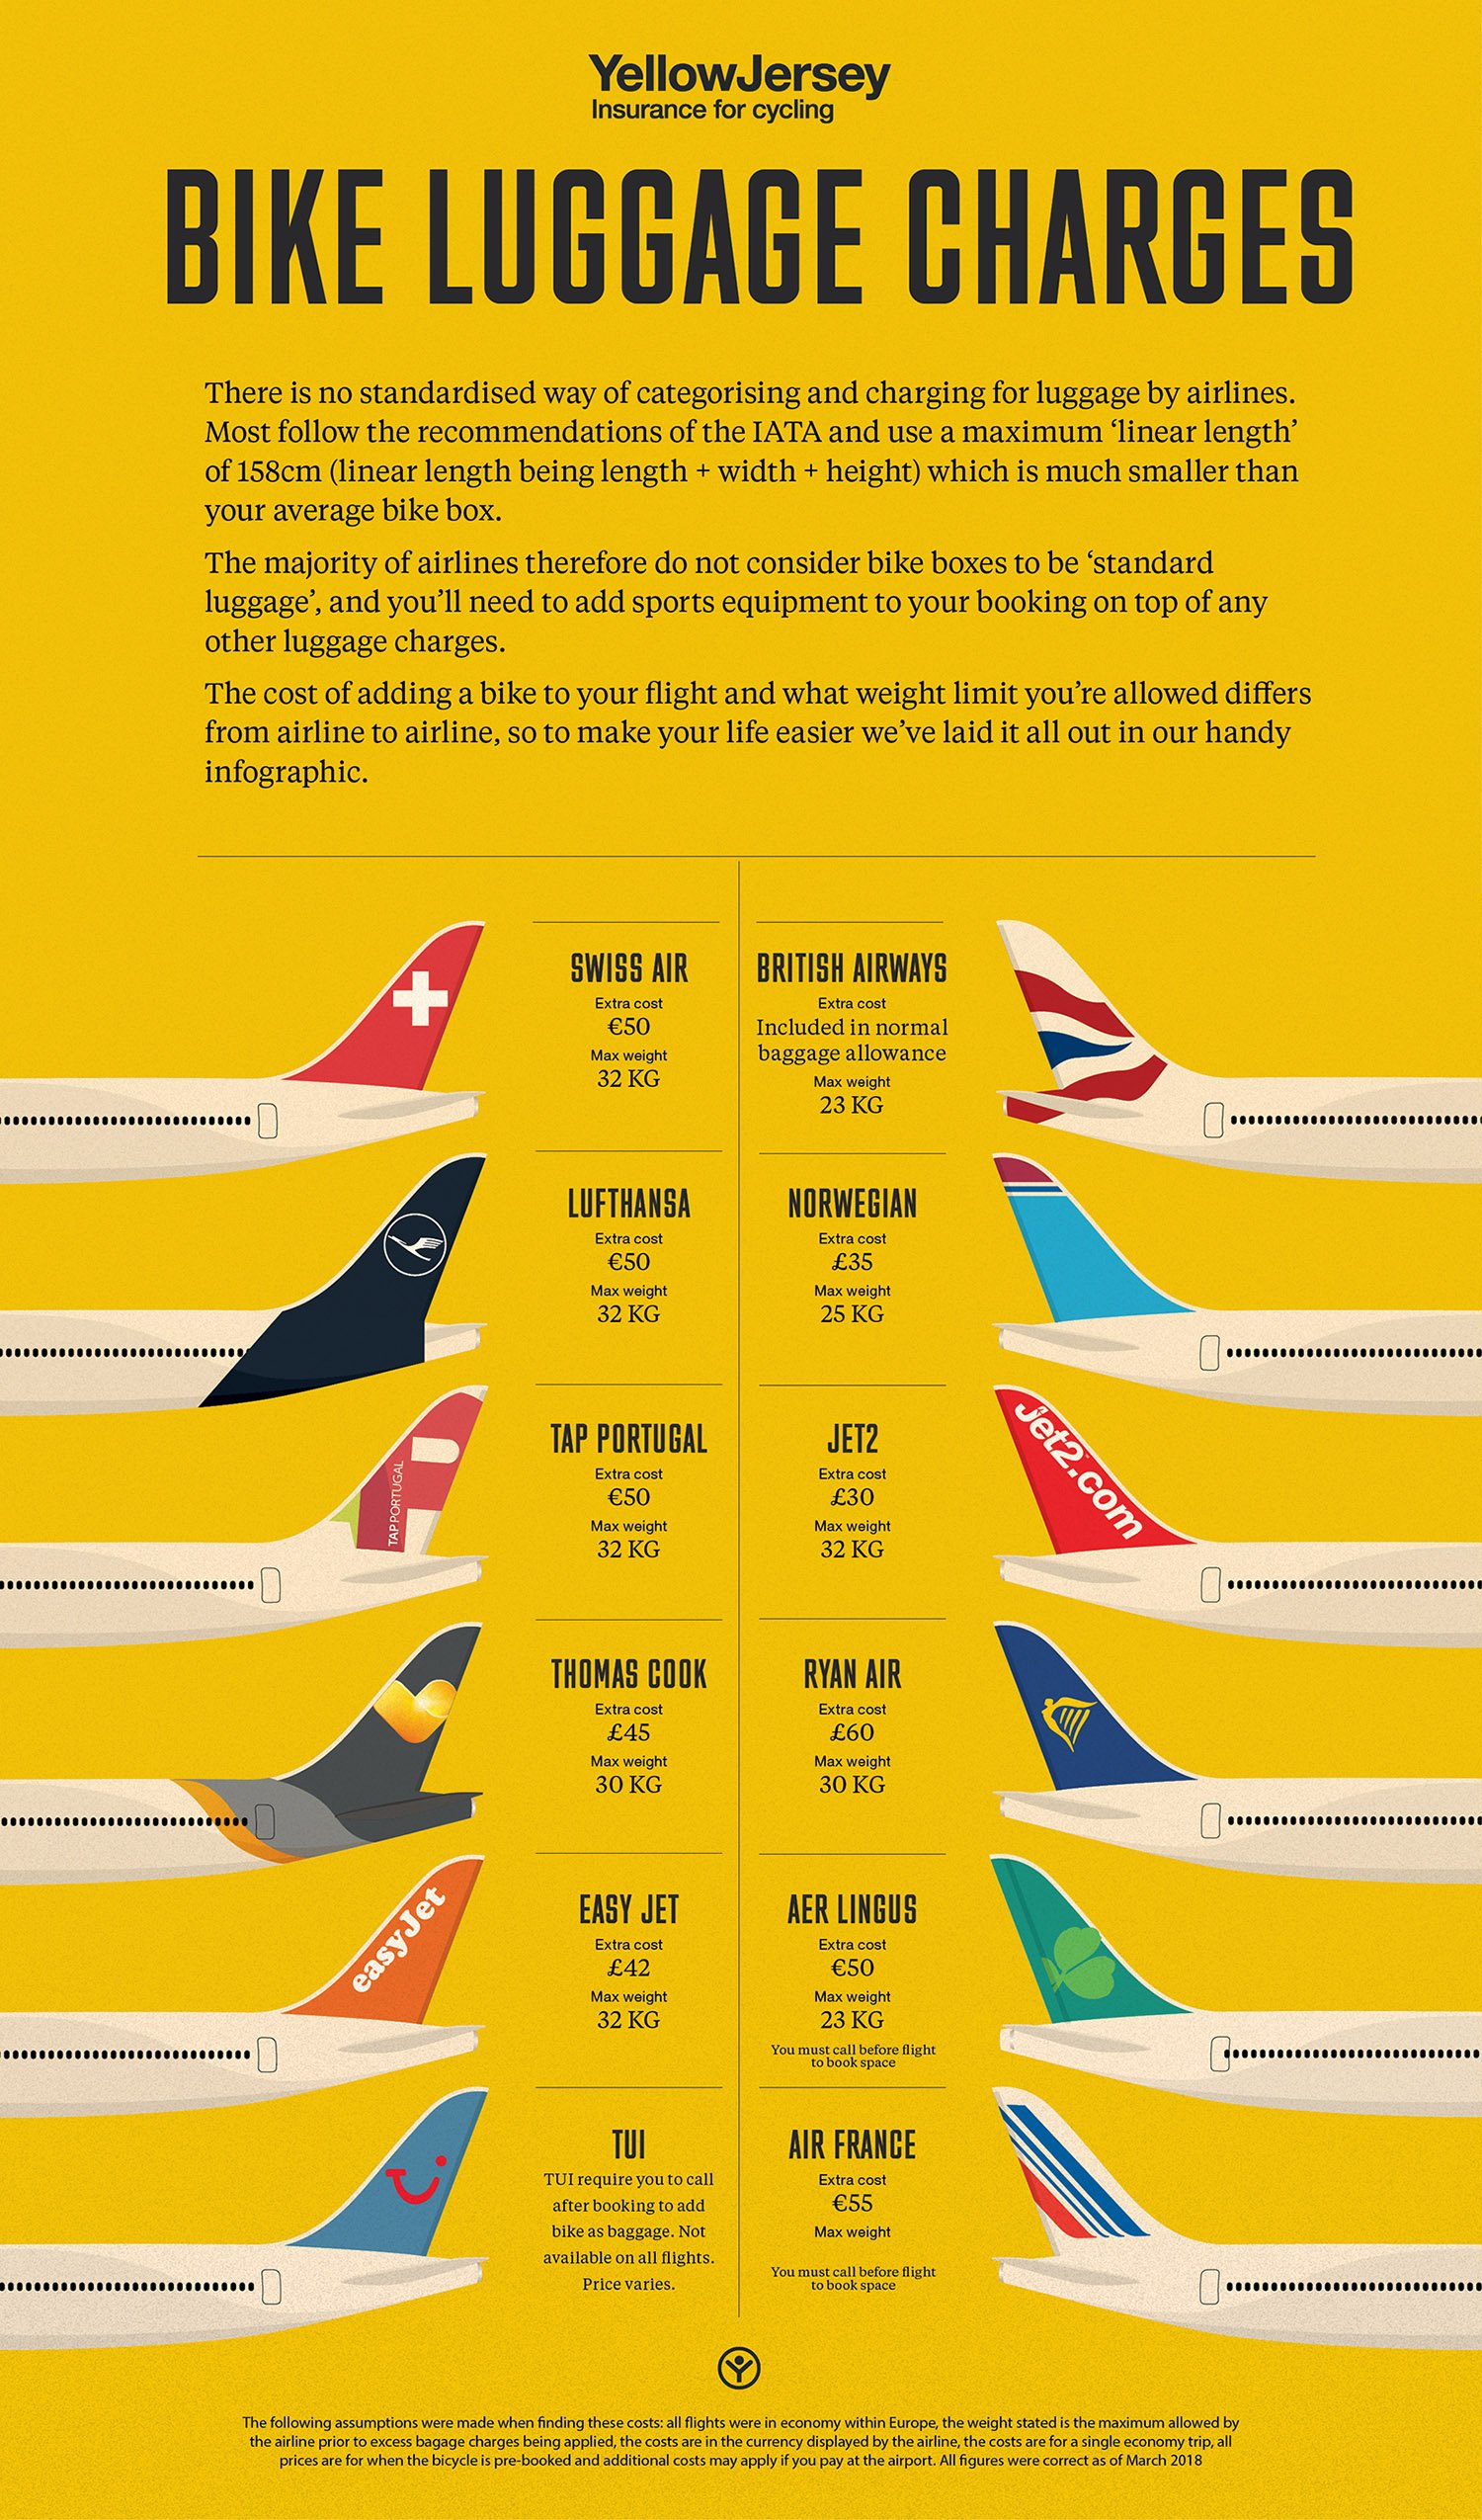 content marketing example, the Yellow Jersey consumer insurance site's bike luggage charges infographic. 